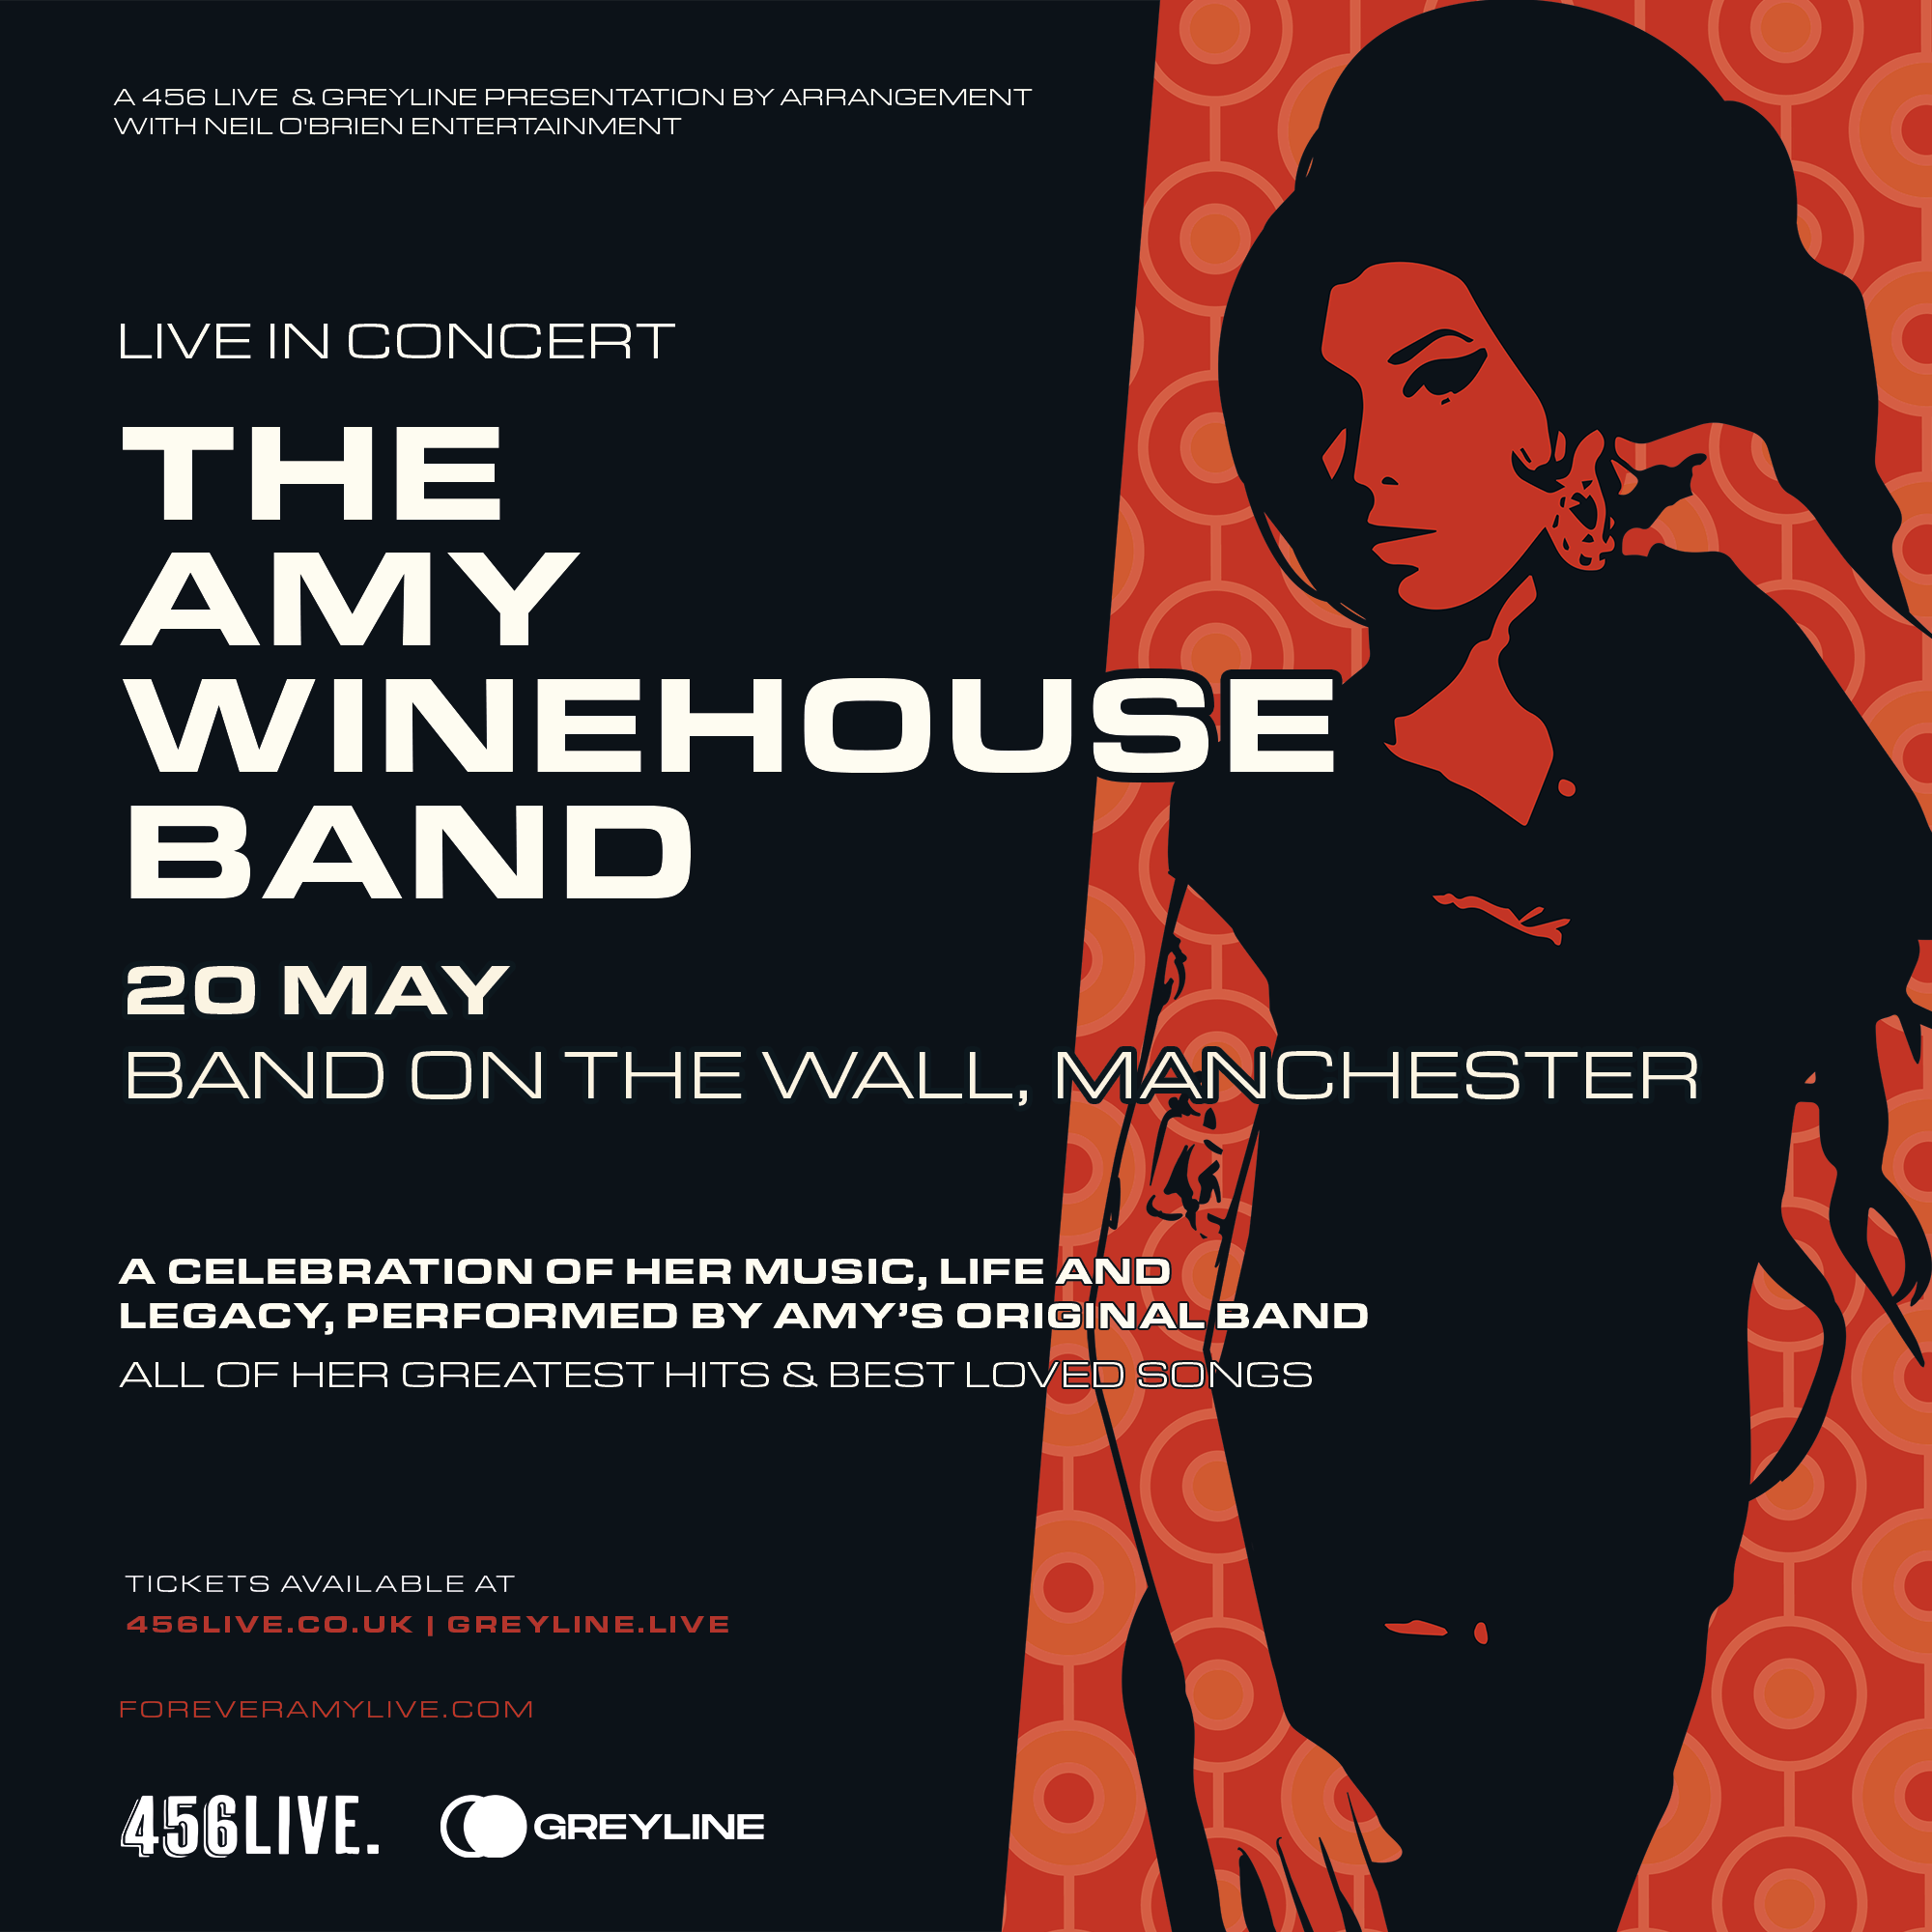 The Amy Winehouse Band – Manchester